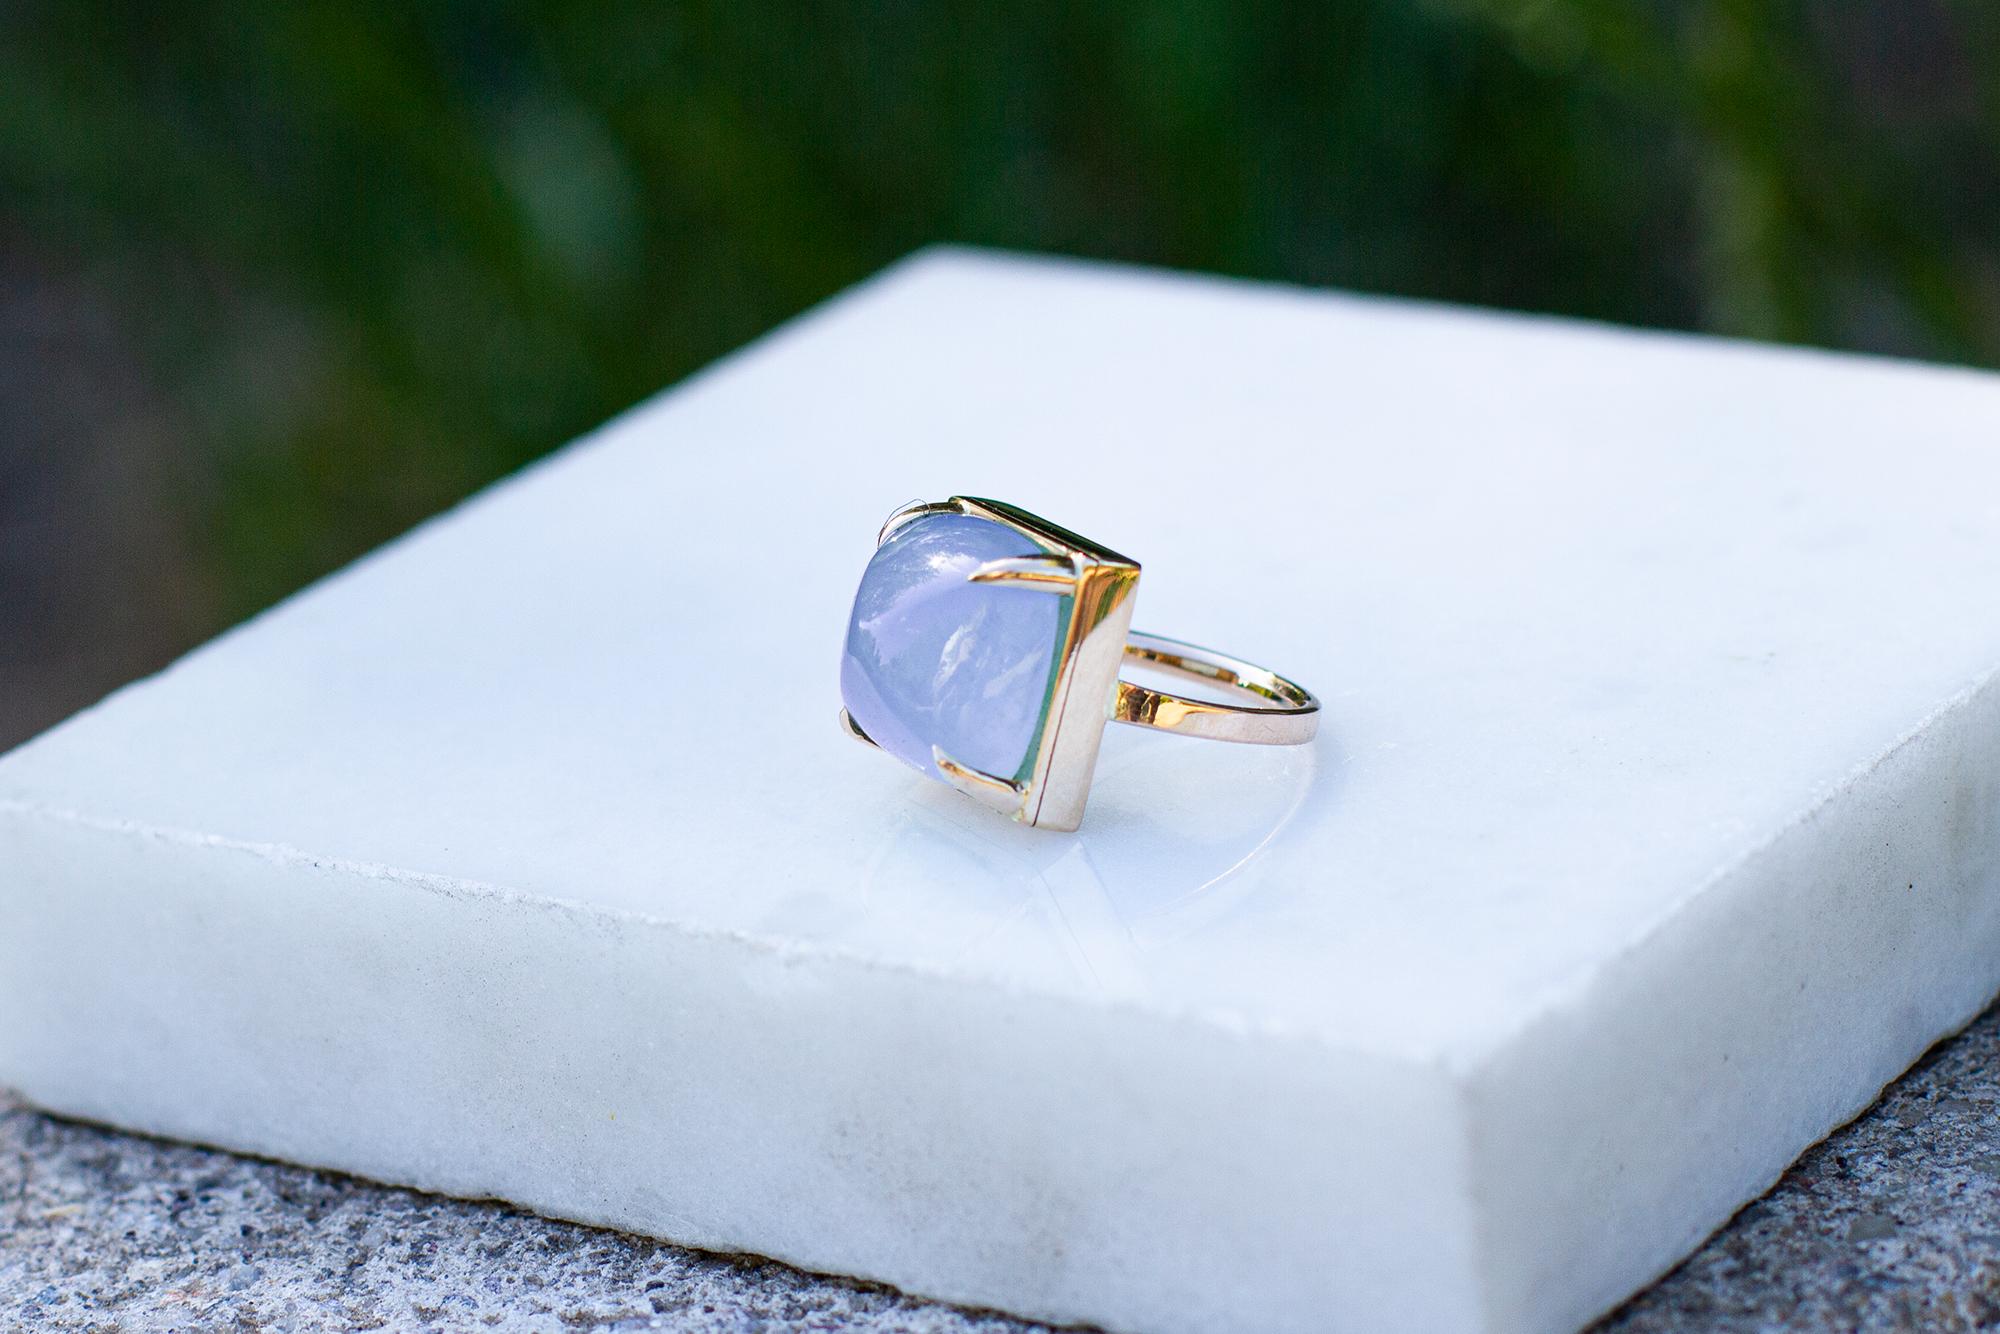 This ring is made of 18 karat yellow gold and sugarloaf cut chalcedony.

When for most of the gem it works the way: the smaller prongs the better. This is the shape and size of the gem that we really enjoy to see avoiding the typical for sugarloaf